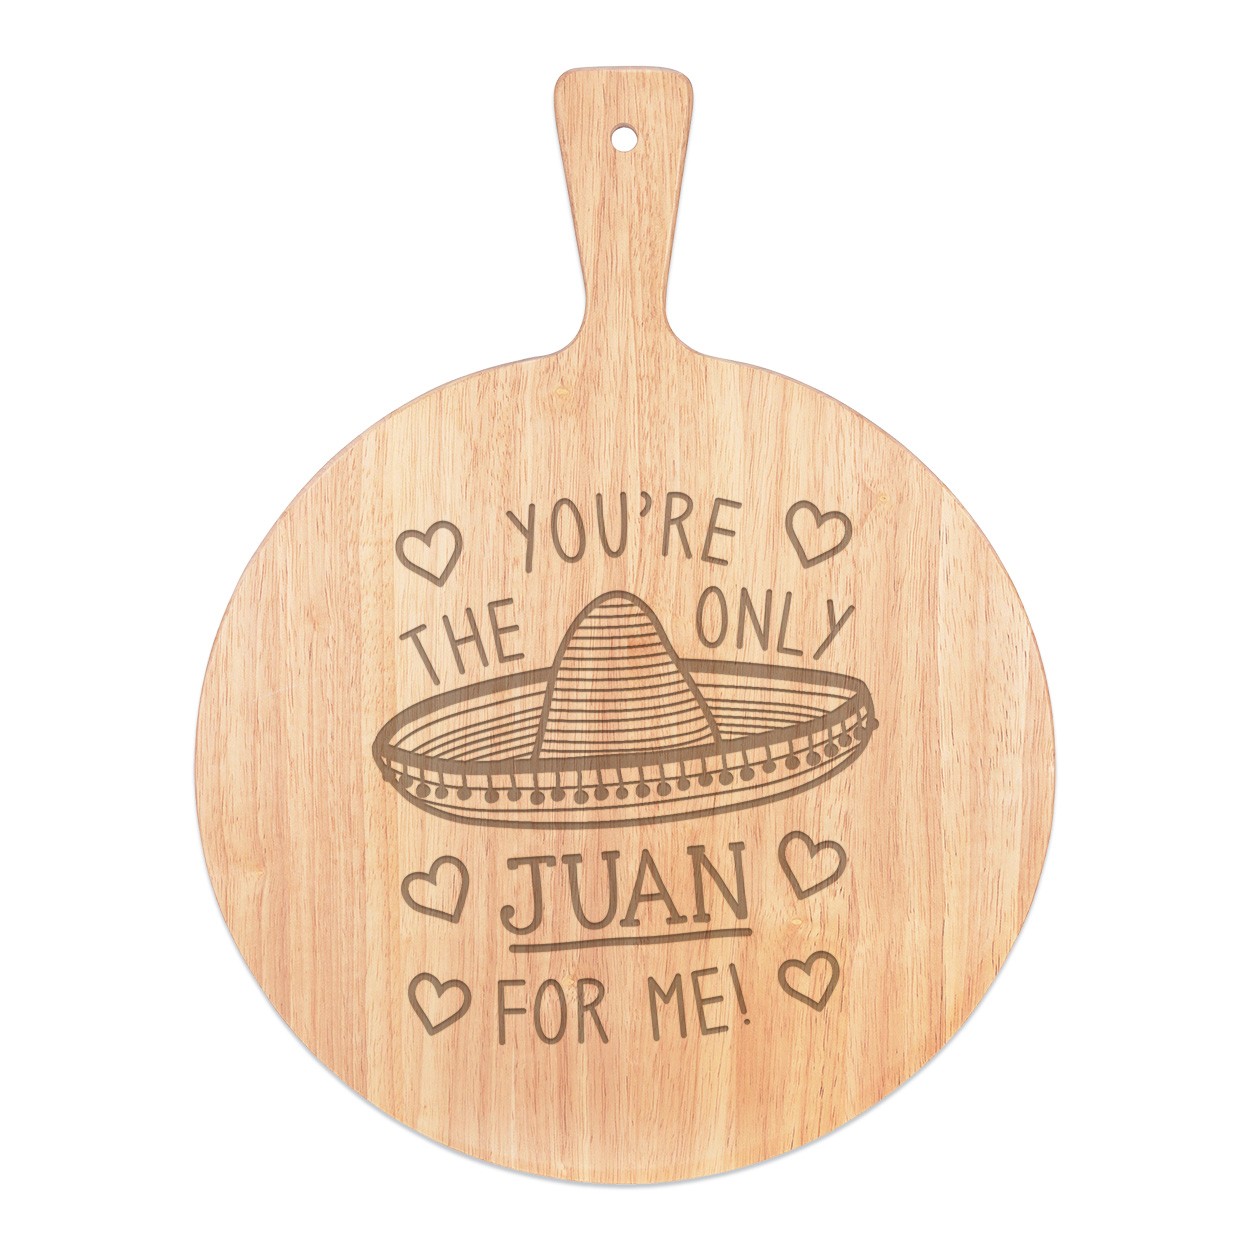 You're The Only Juan For Me Pizza Board Paddle Serving Tray Handle Round Wooden 45x34cm